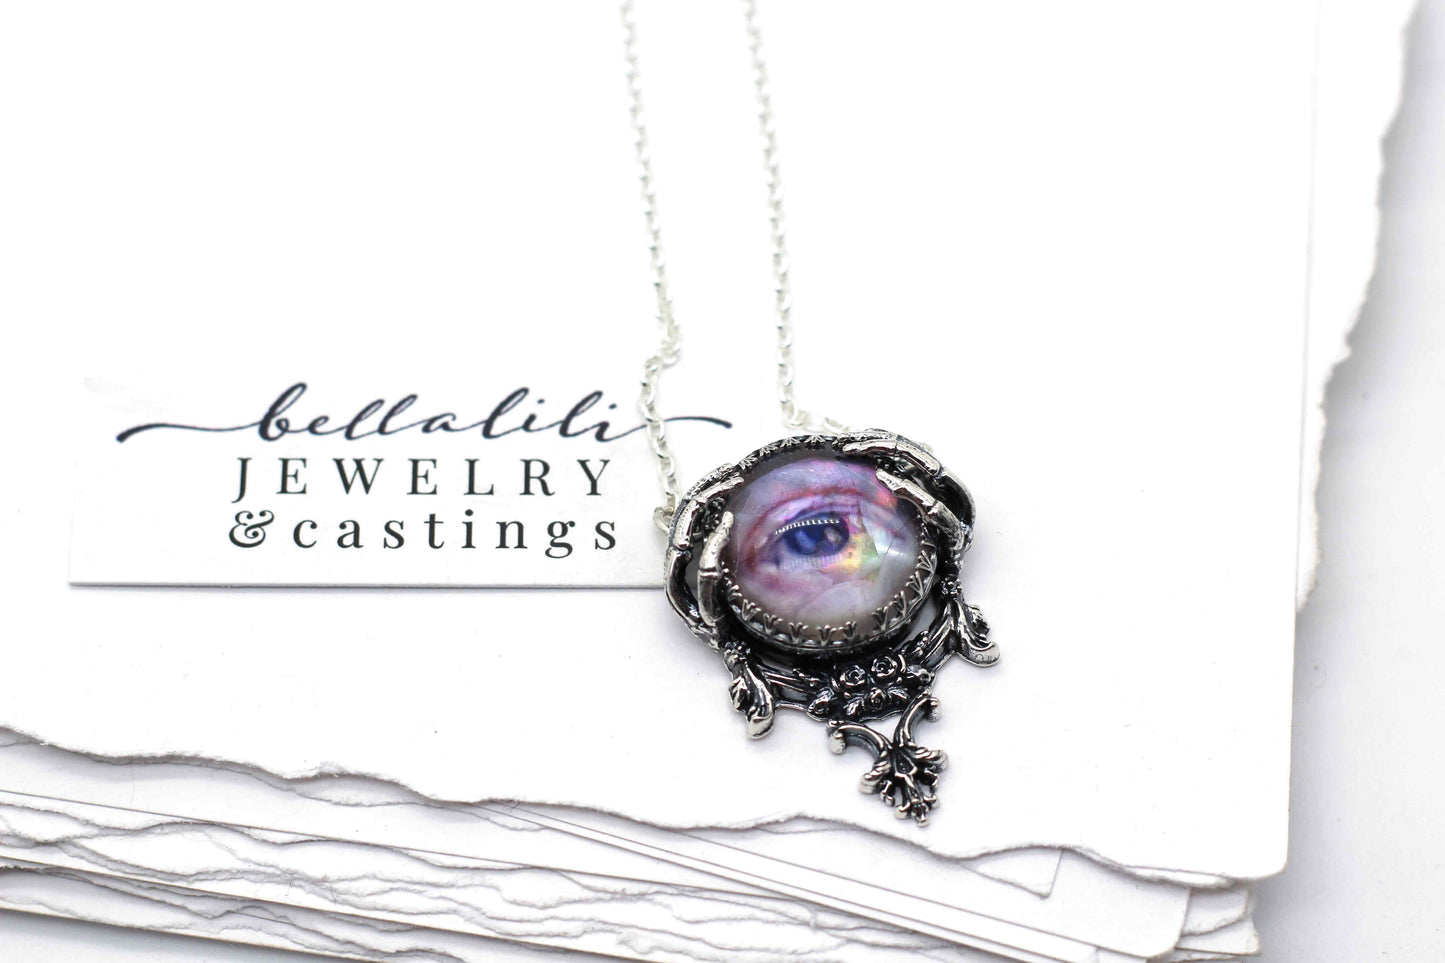 Lover's Eye, "Sinister" Antique reproduction Sterling silver Necklace